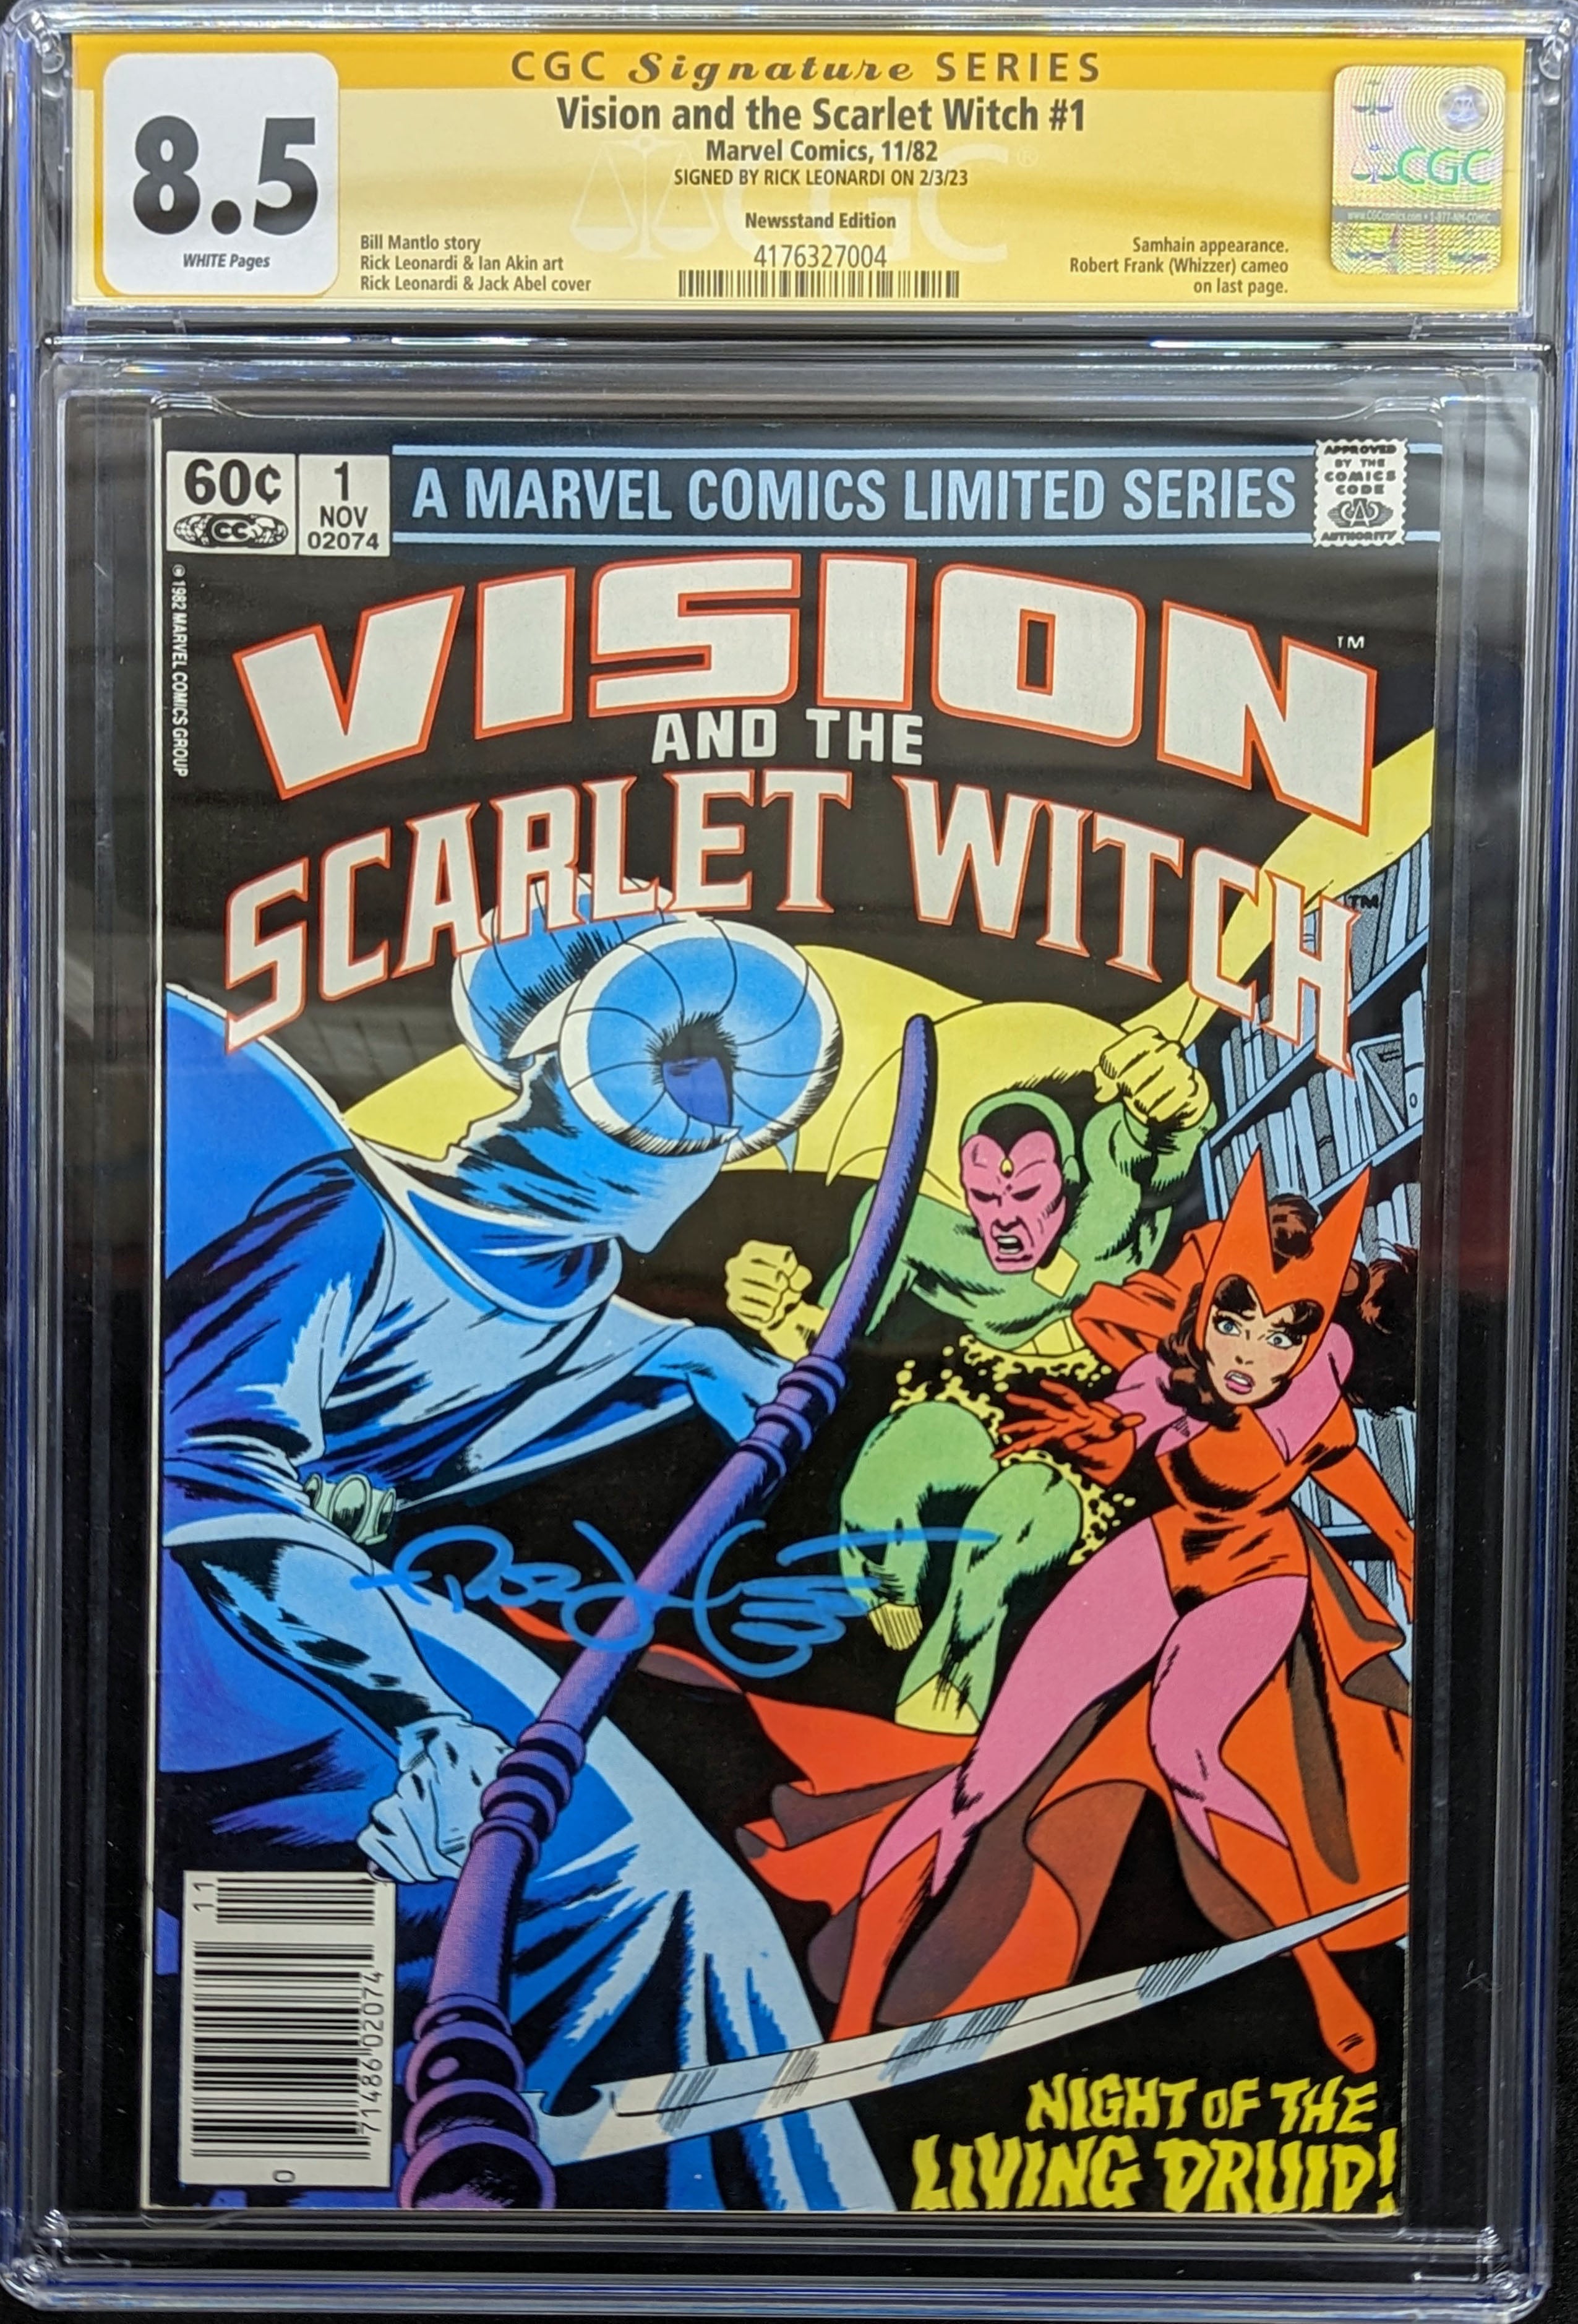 Vision and the Scarlet Witch (1982) #1 CGC 8.5 Signed by Rick Leonardi